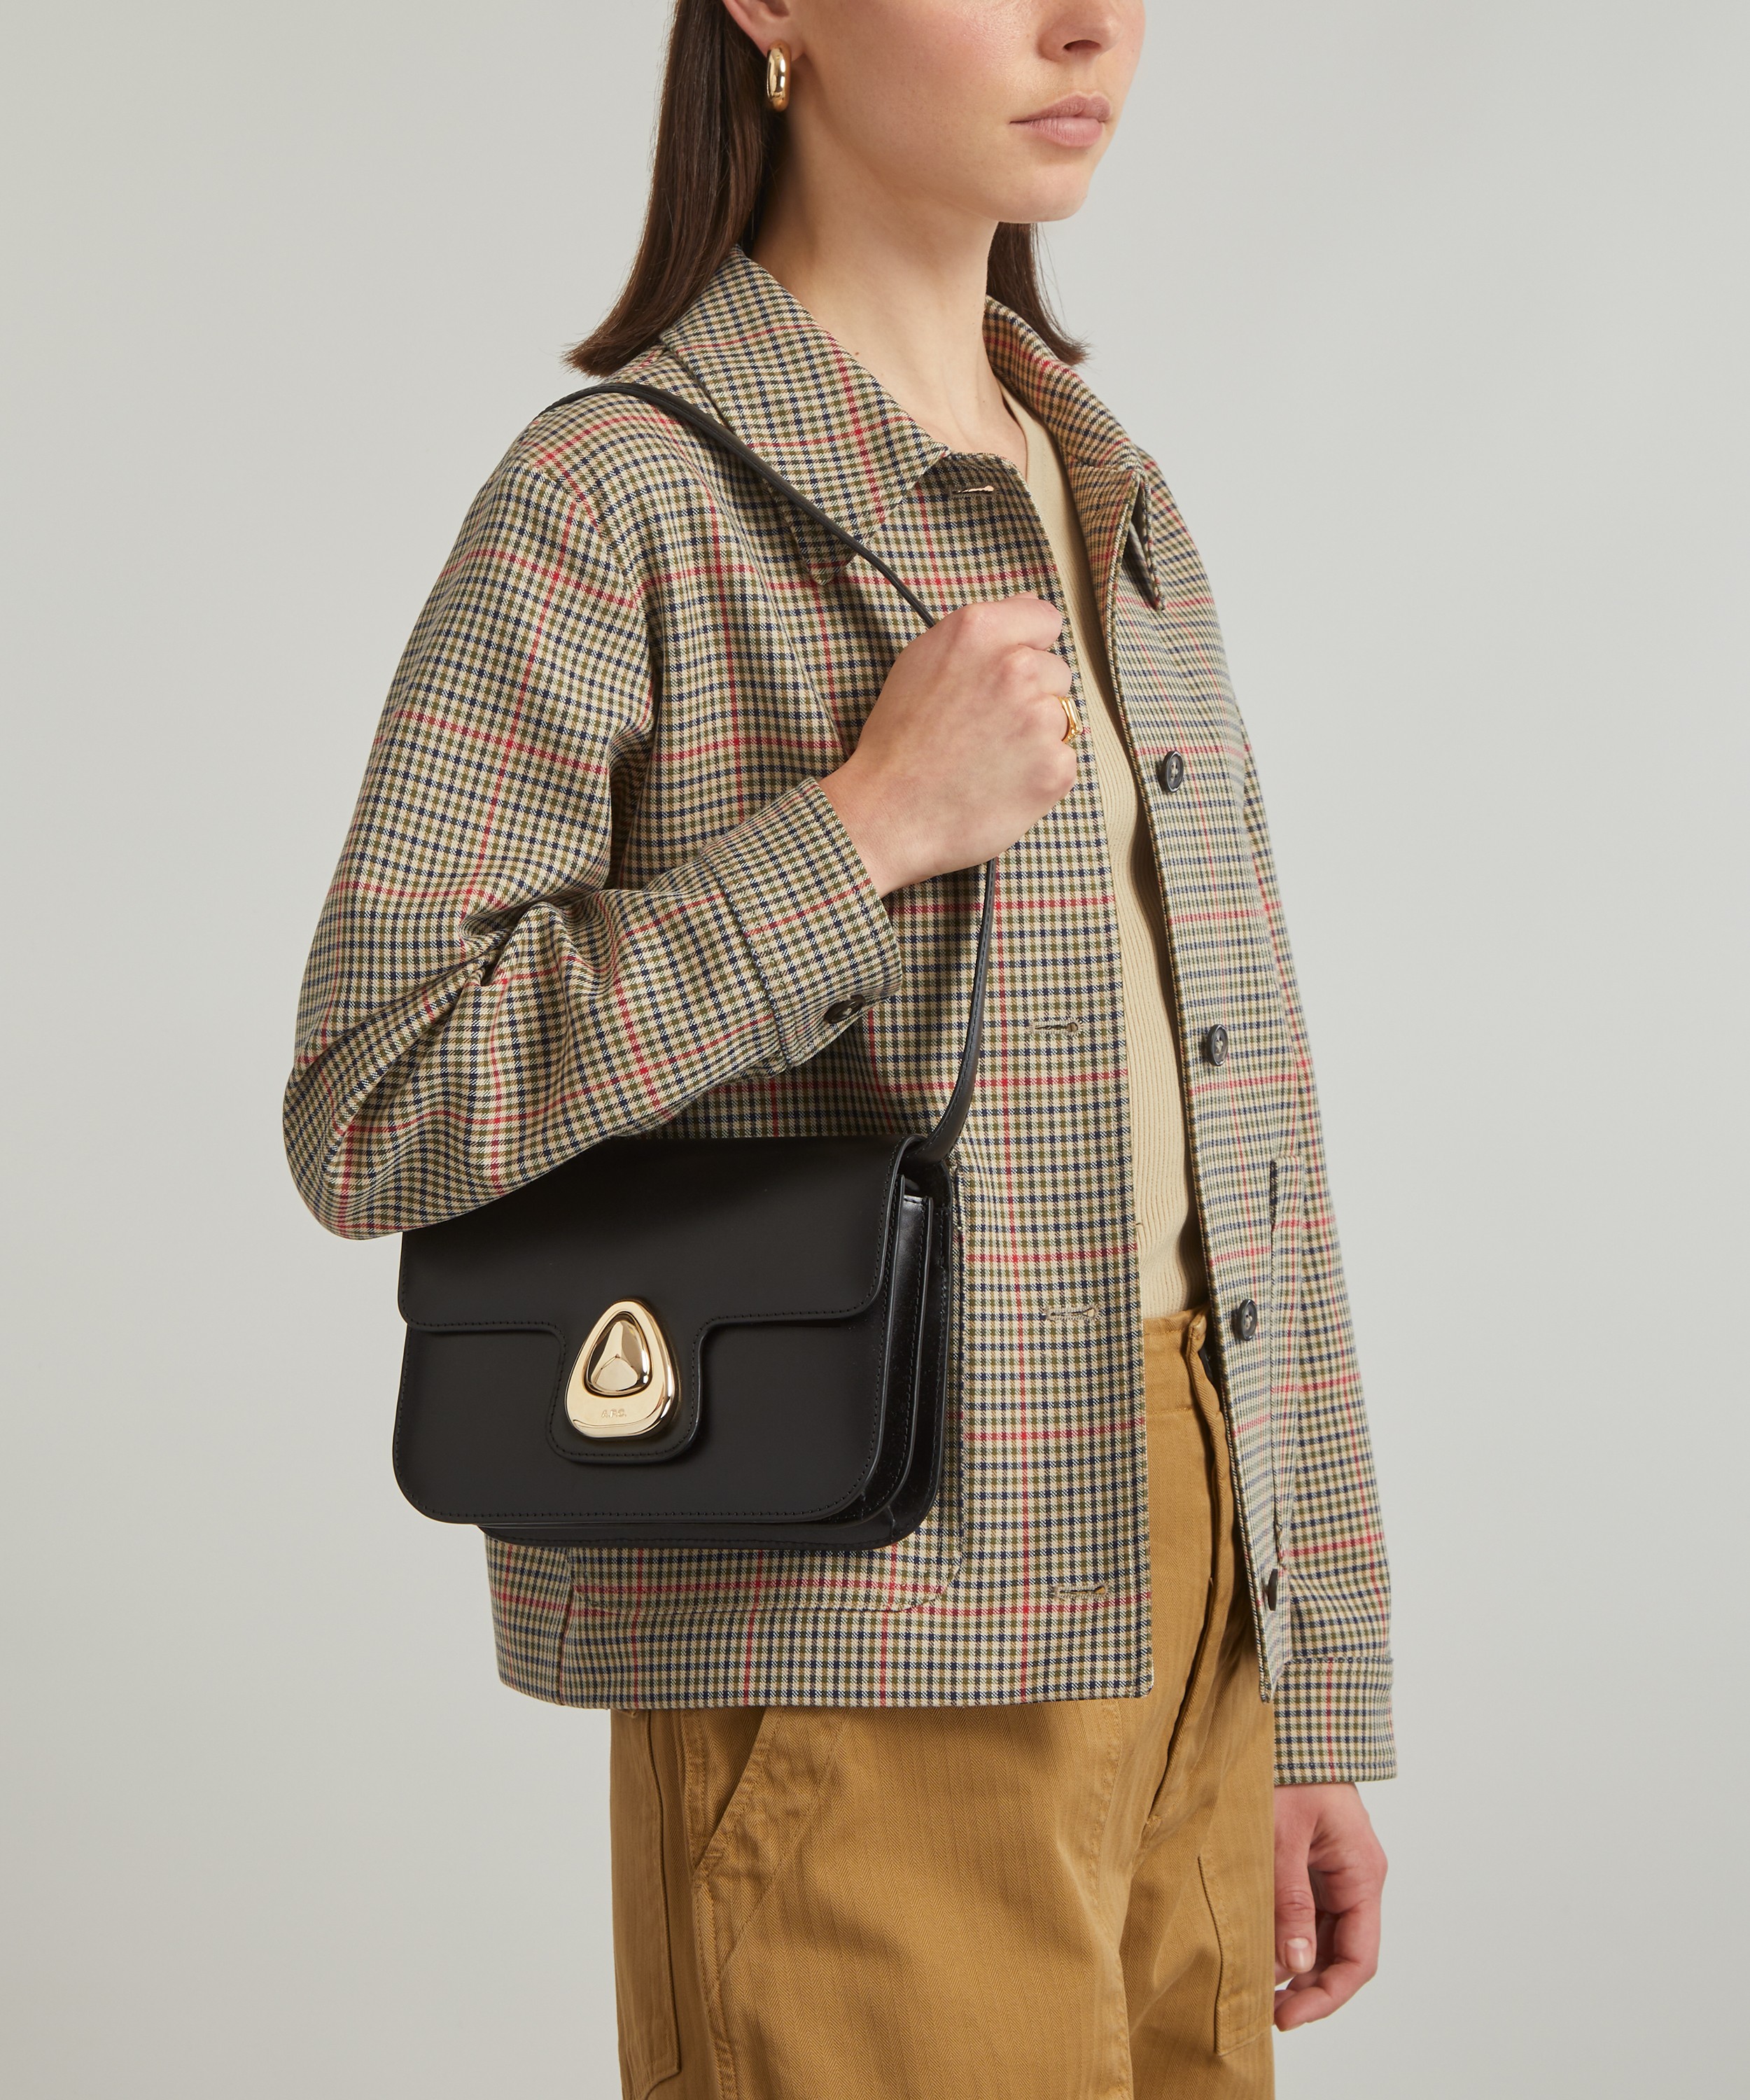 A.P.C. Astra Small Bag in Black